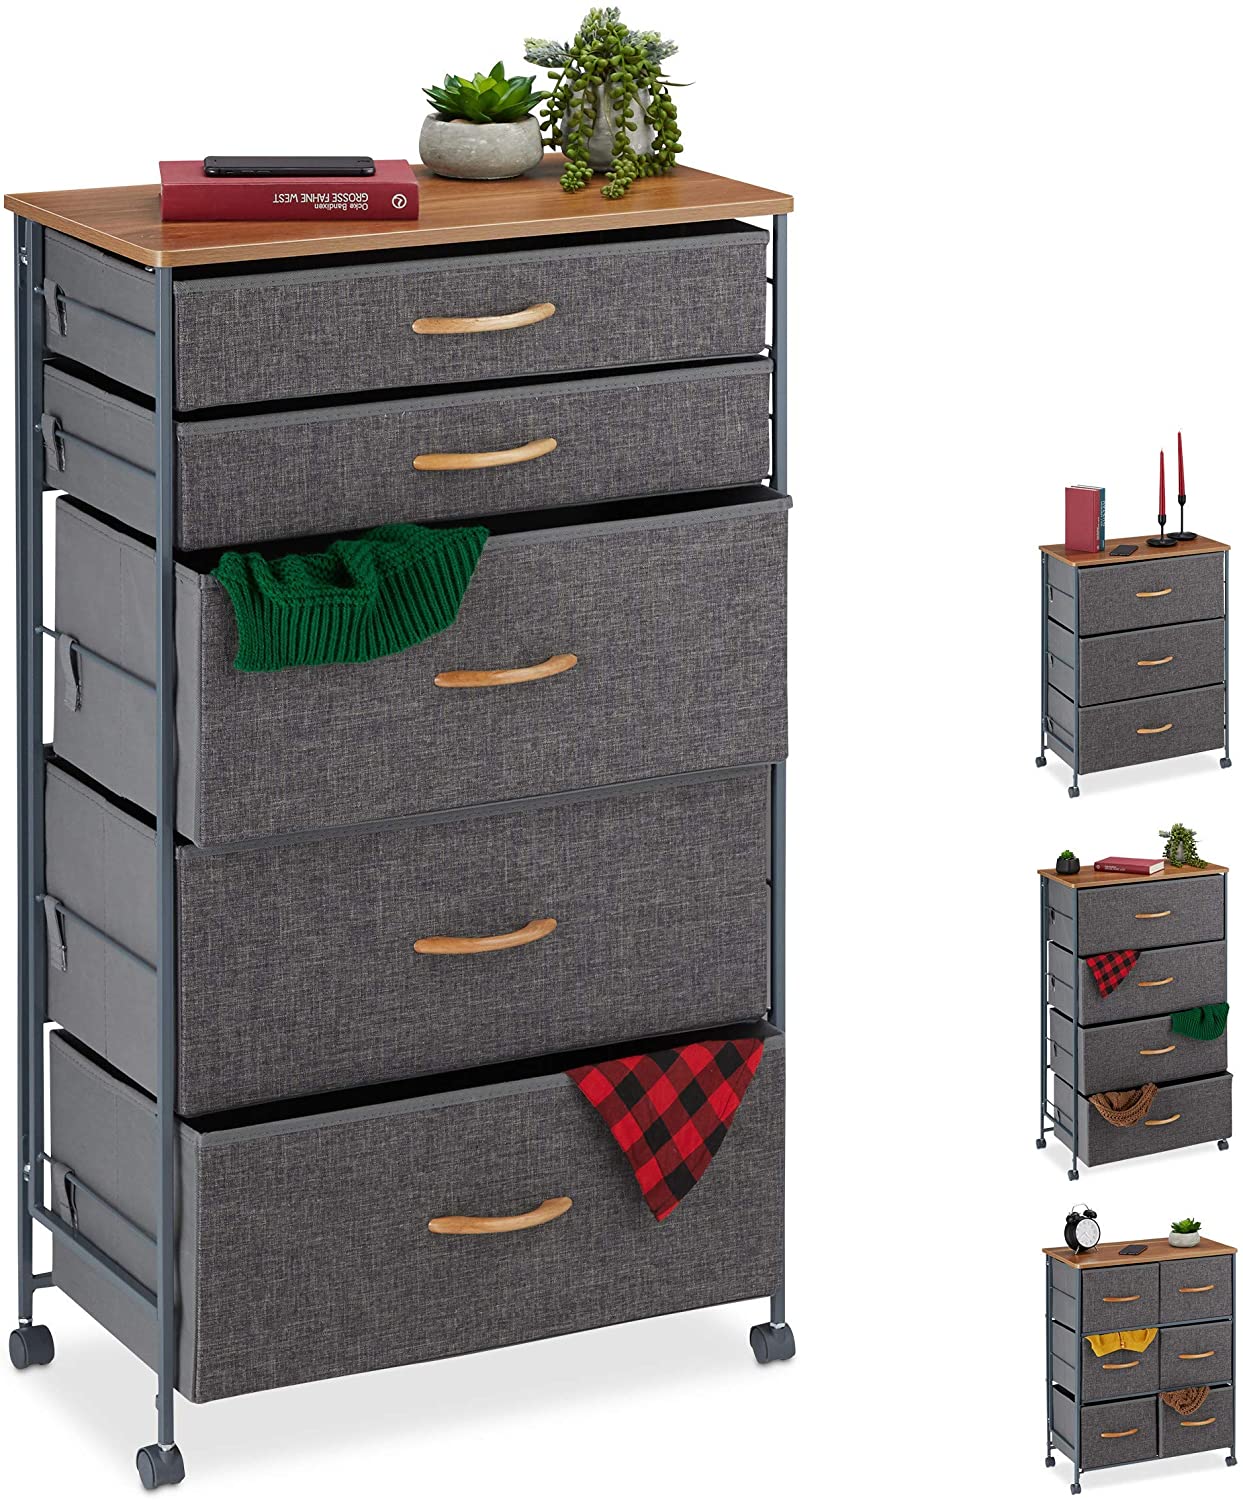 Relaxdays Drawer Cabinet With Wheels 6 Fabric Drawers Decorative Fabric Cab